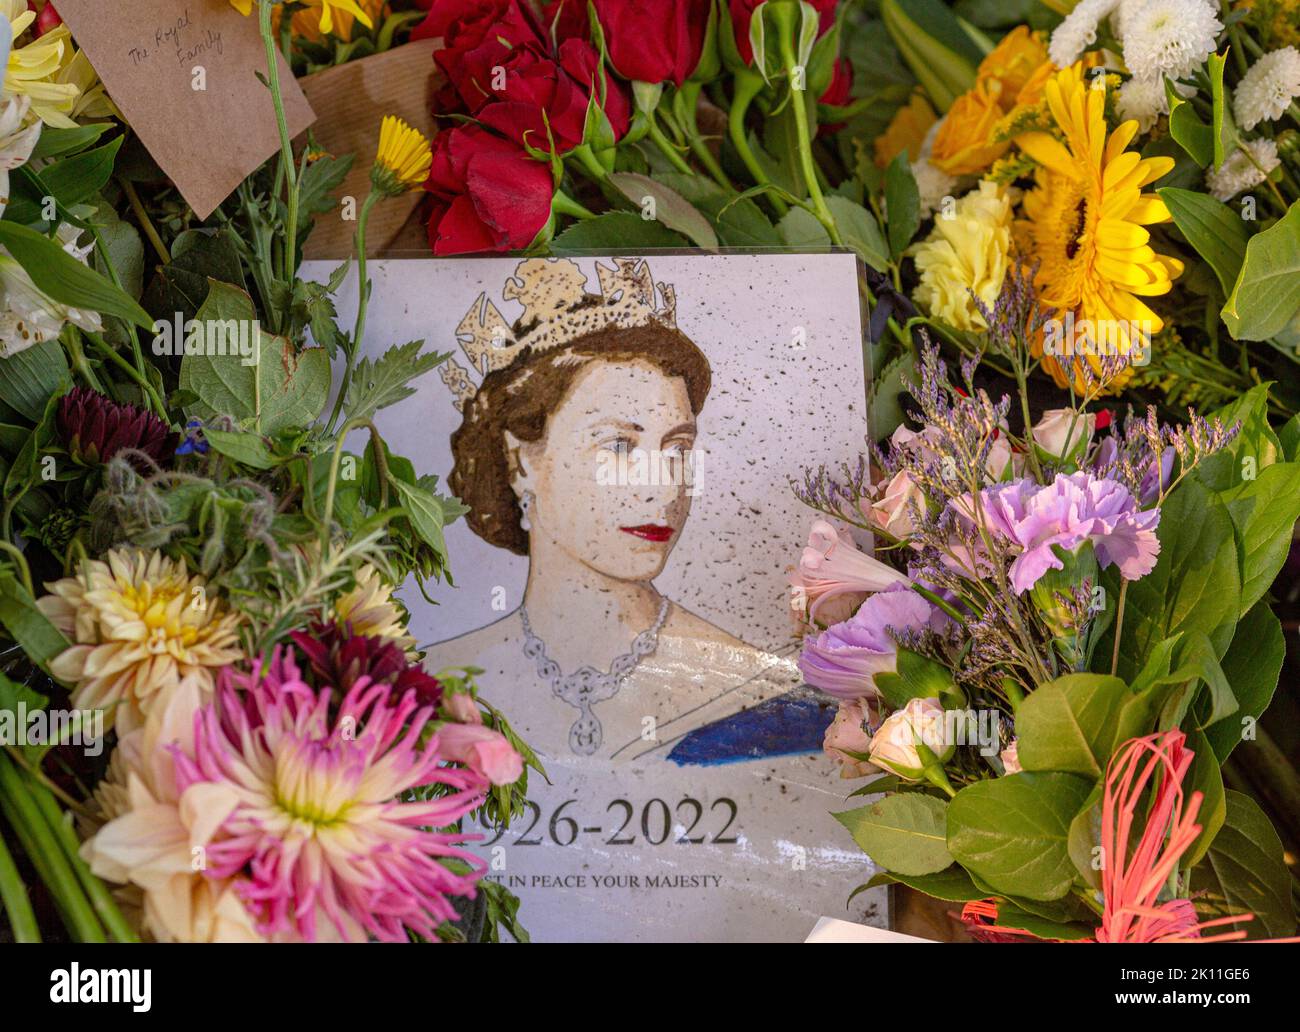 London UK. 14 September 2022. Members of the public continue to bring flowers and personal messages of condolence to Green Park near Buckingham palace to express their sadness and sympathy after the death of Queen Elizabeth II the longest serving British monarch who died at Balmoral castle on 8 September.Photo Horst A. Friedrichs Alamy Live News Stock Photo